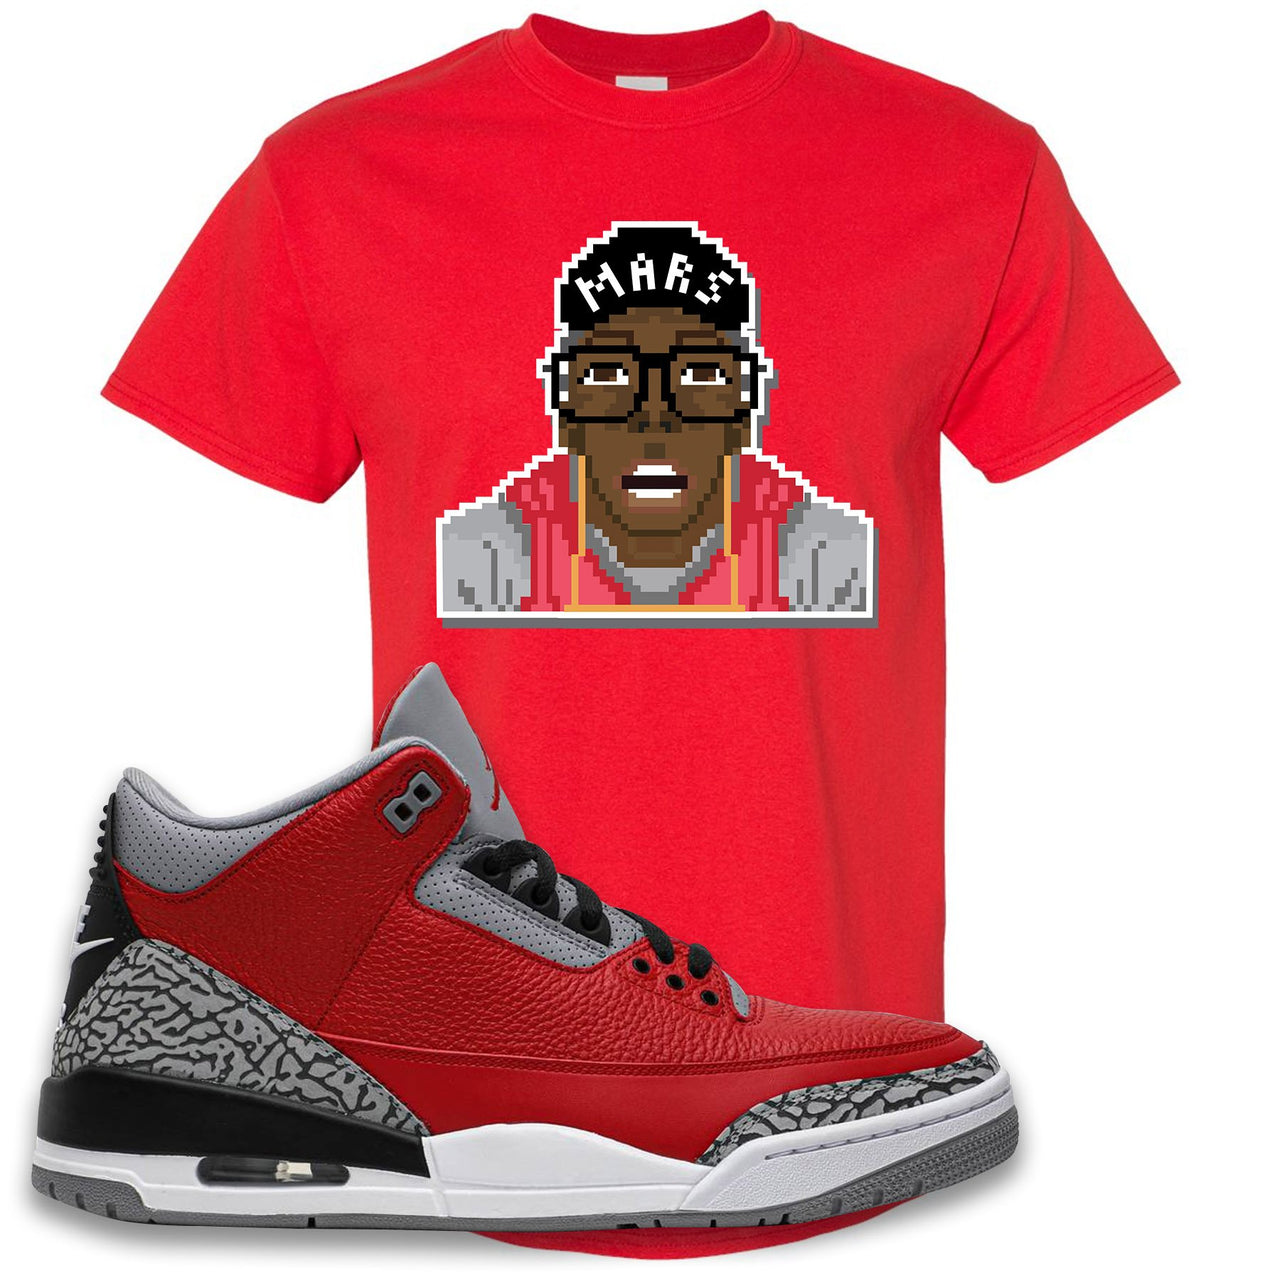 Jordan 3 Red Cement Chicago All-Star Sneaker True Red T Shirt | Tees to match Jordan 3 All Star Red Cement Shoes | Mars Pixel